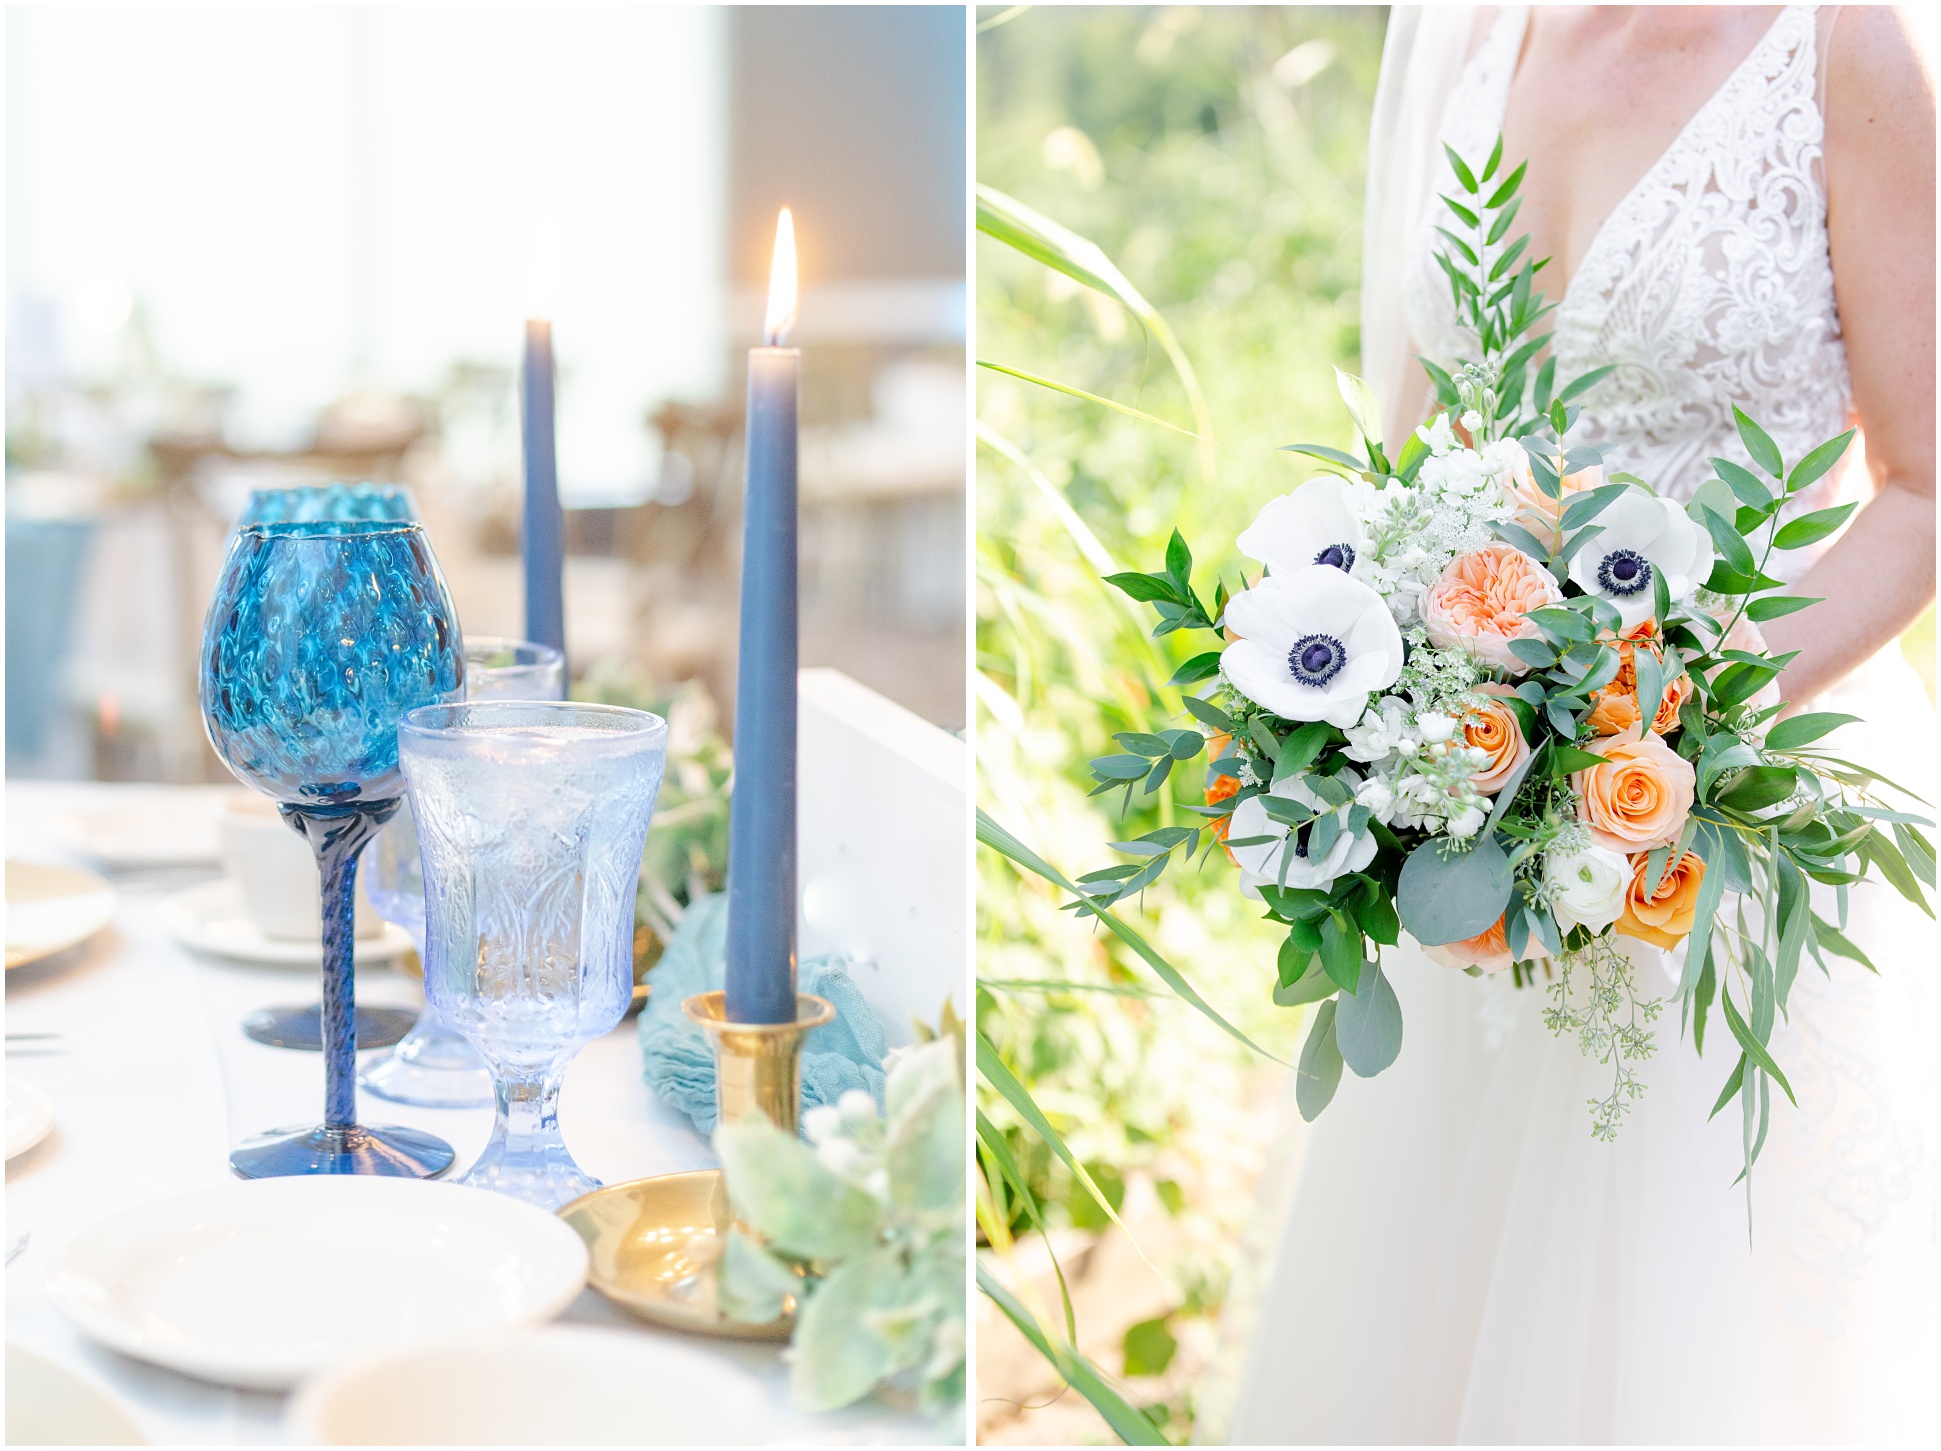 grey blue candle centerpiece with crystal blue wine glasses; bride holding white, light pink, orange and green bouquet